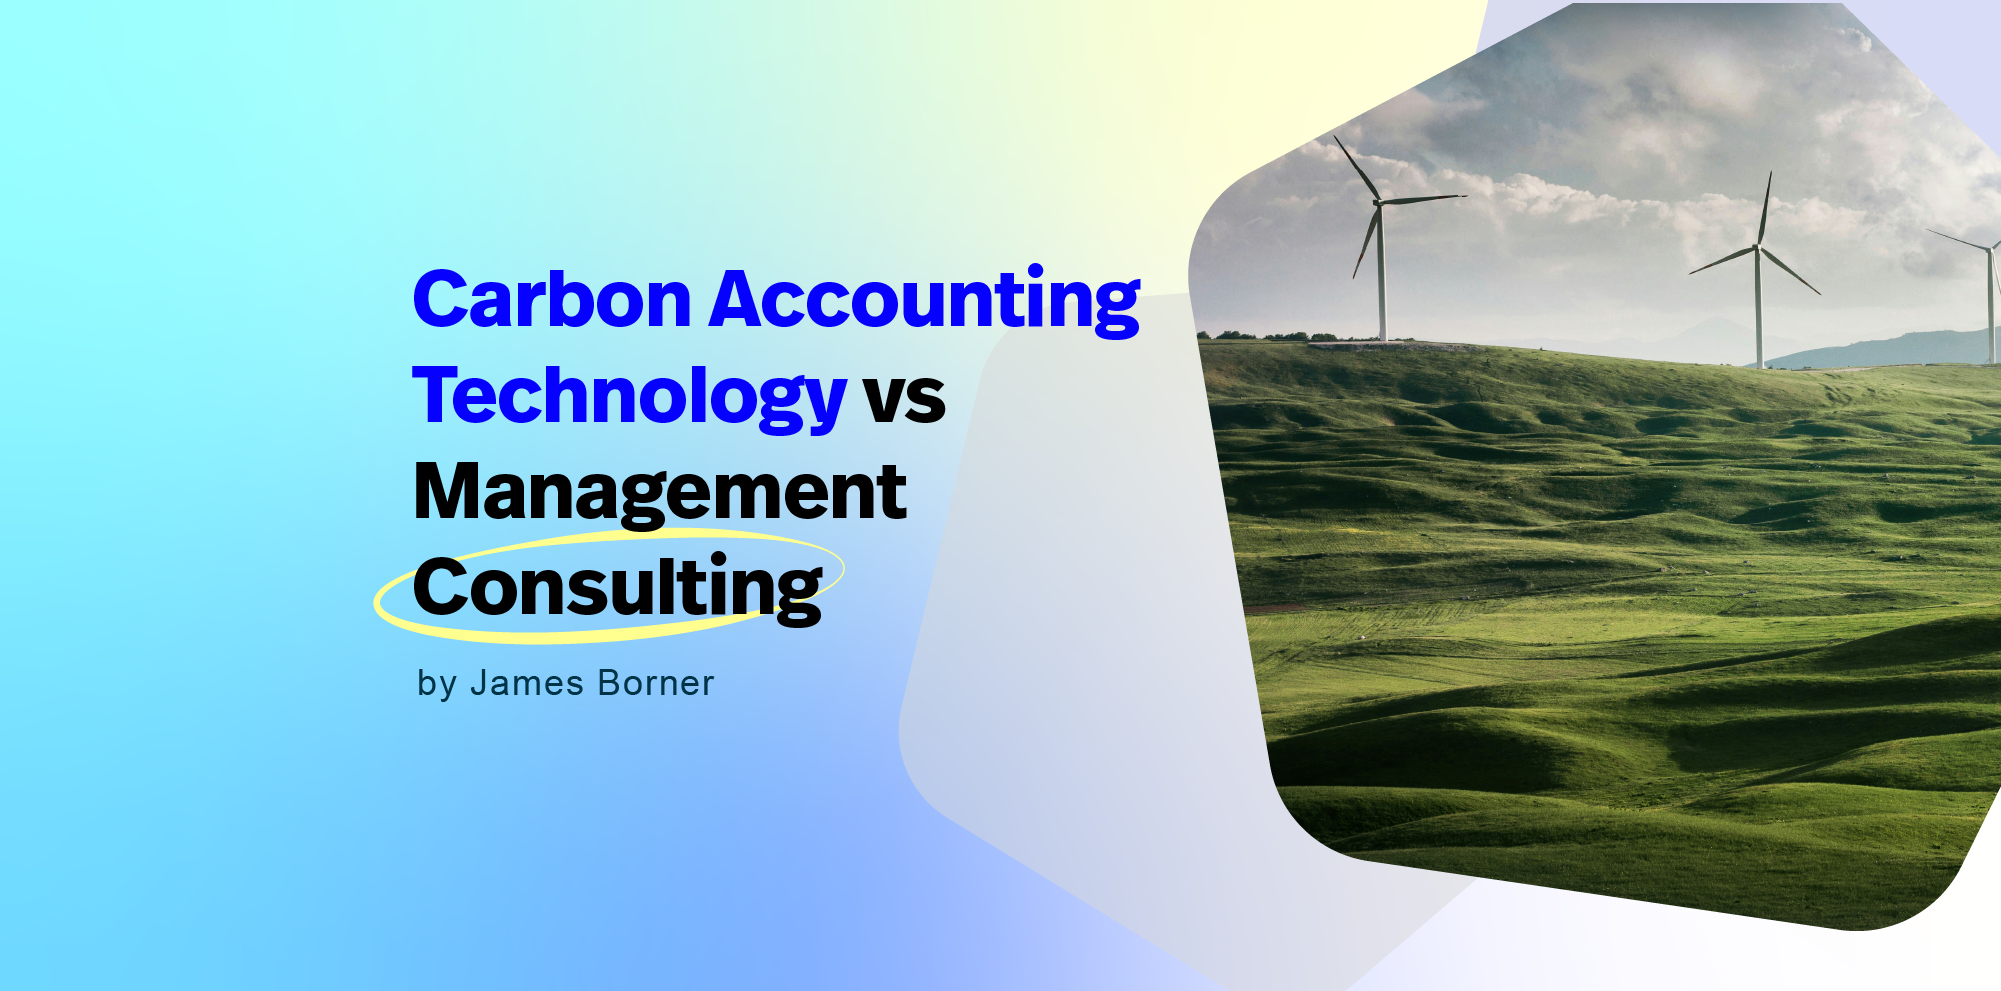 Carbon Accounting Technology vs Management Consulting